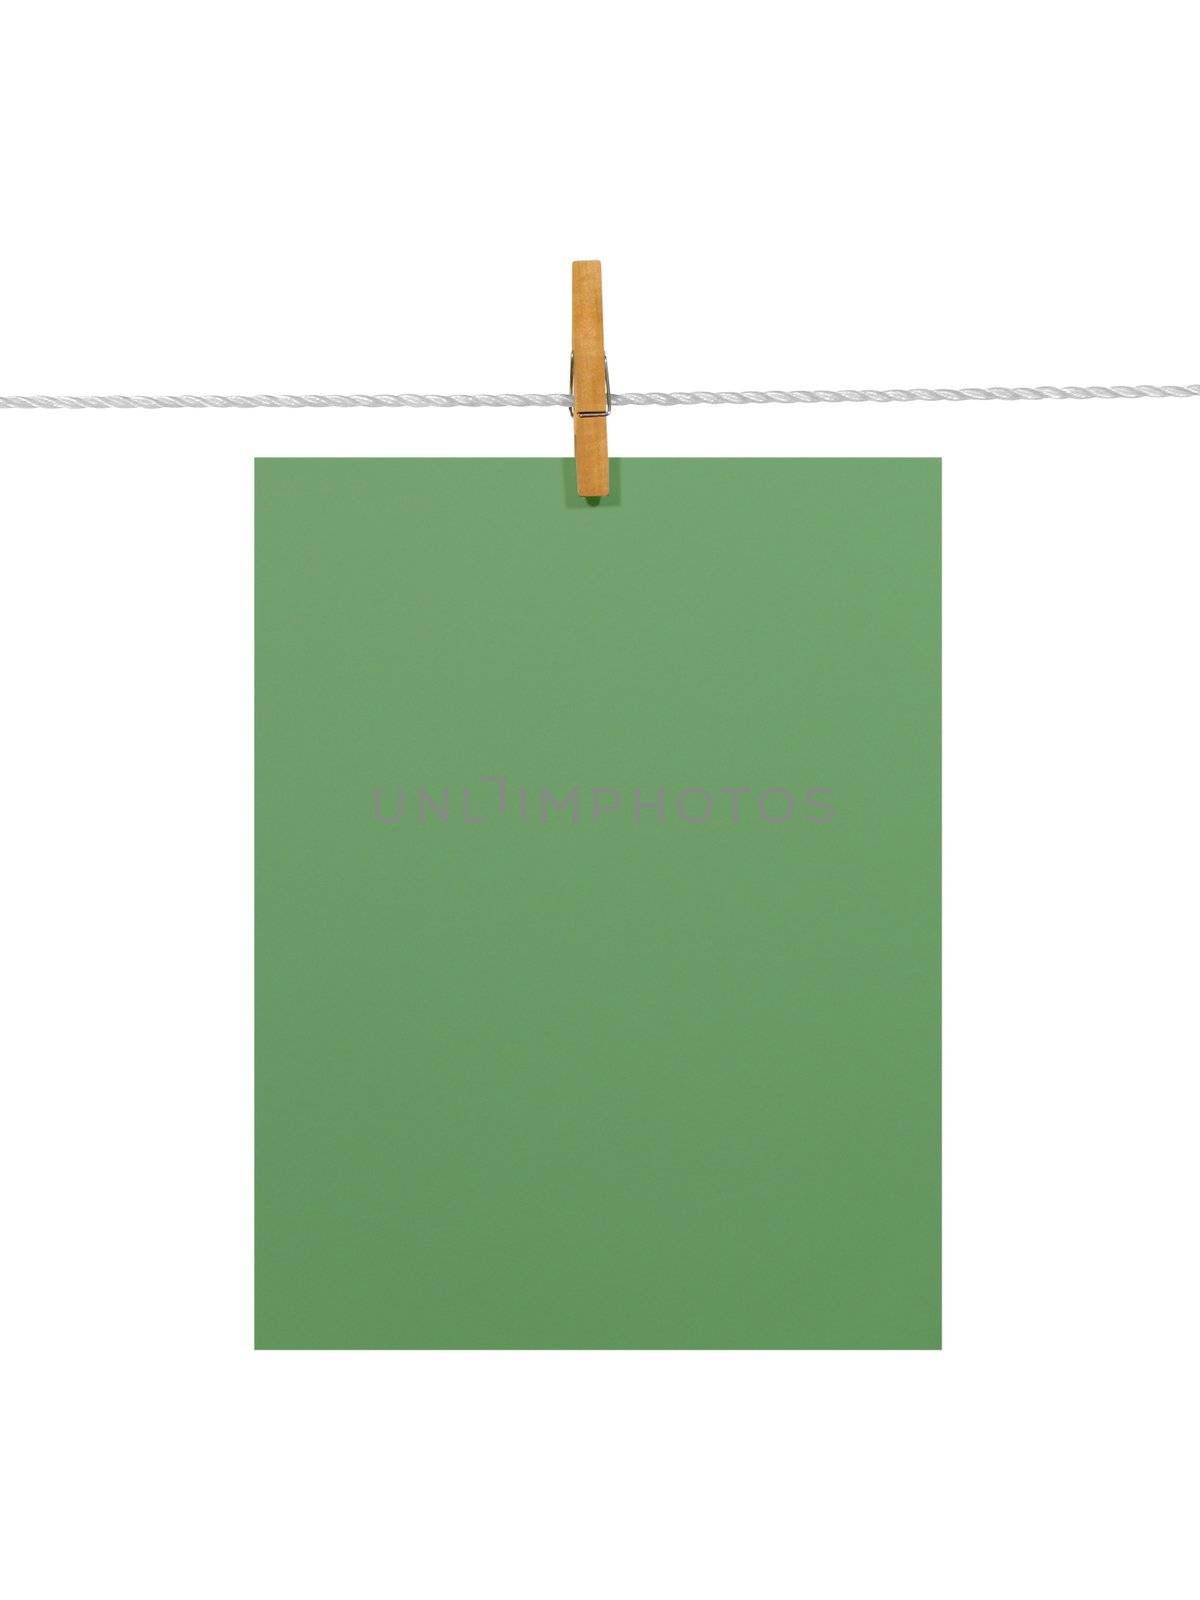 Green paper sheet on a clothes line (+2 clipping paths) by anikasalsera